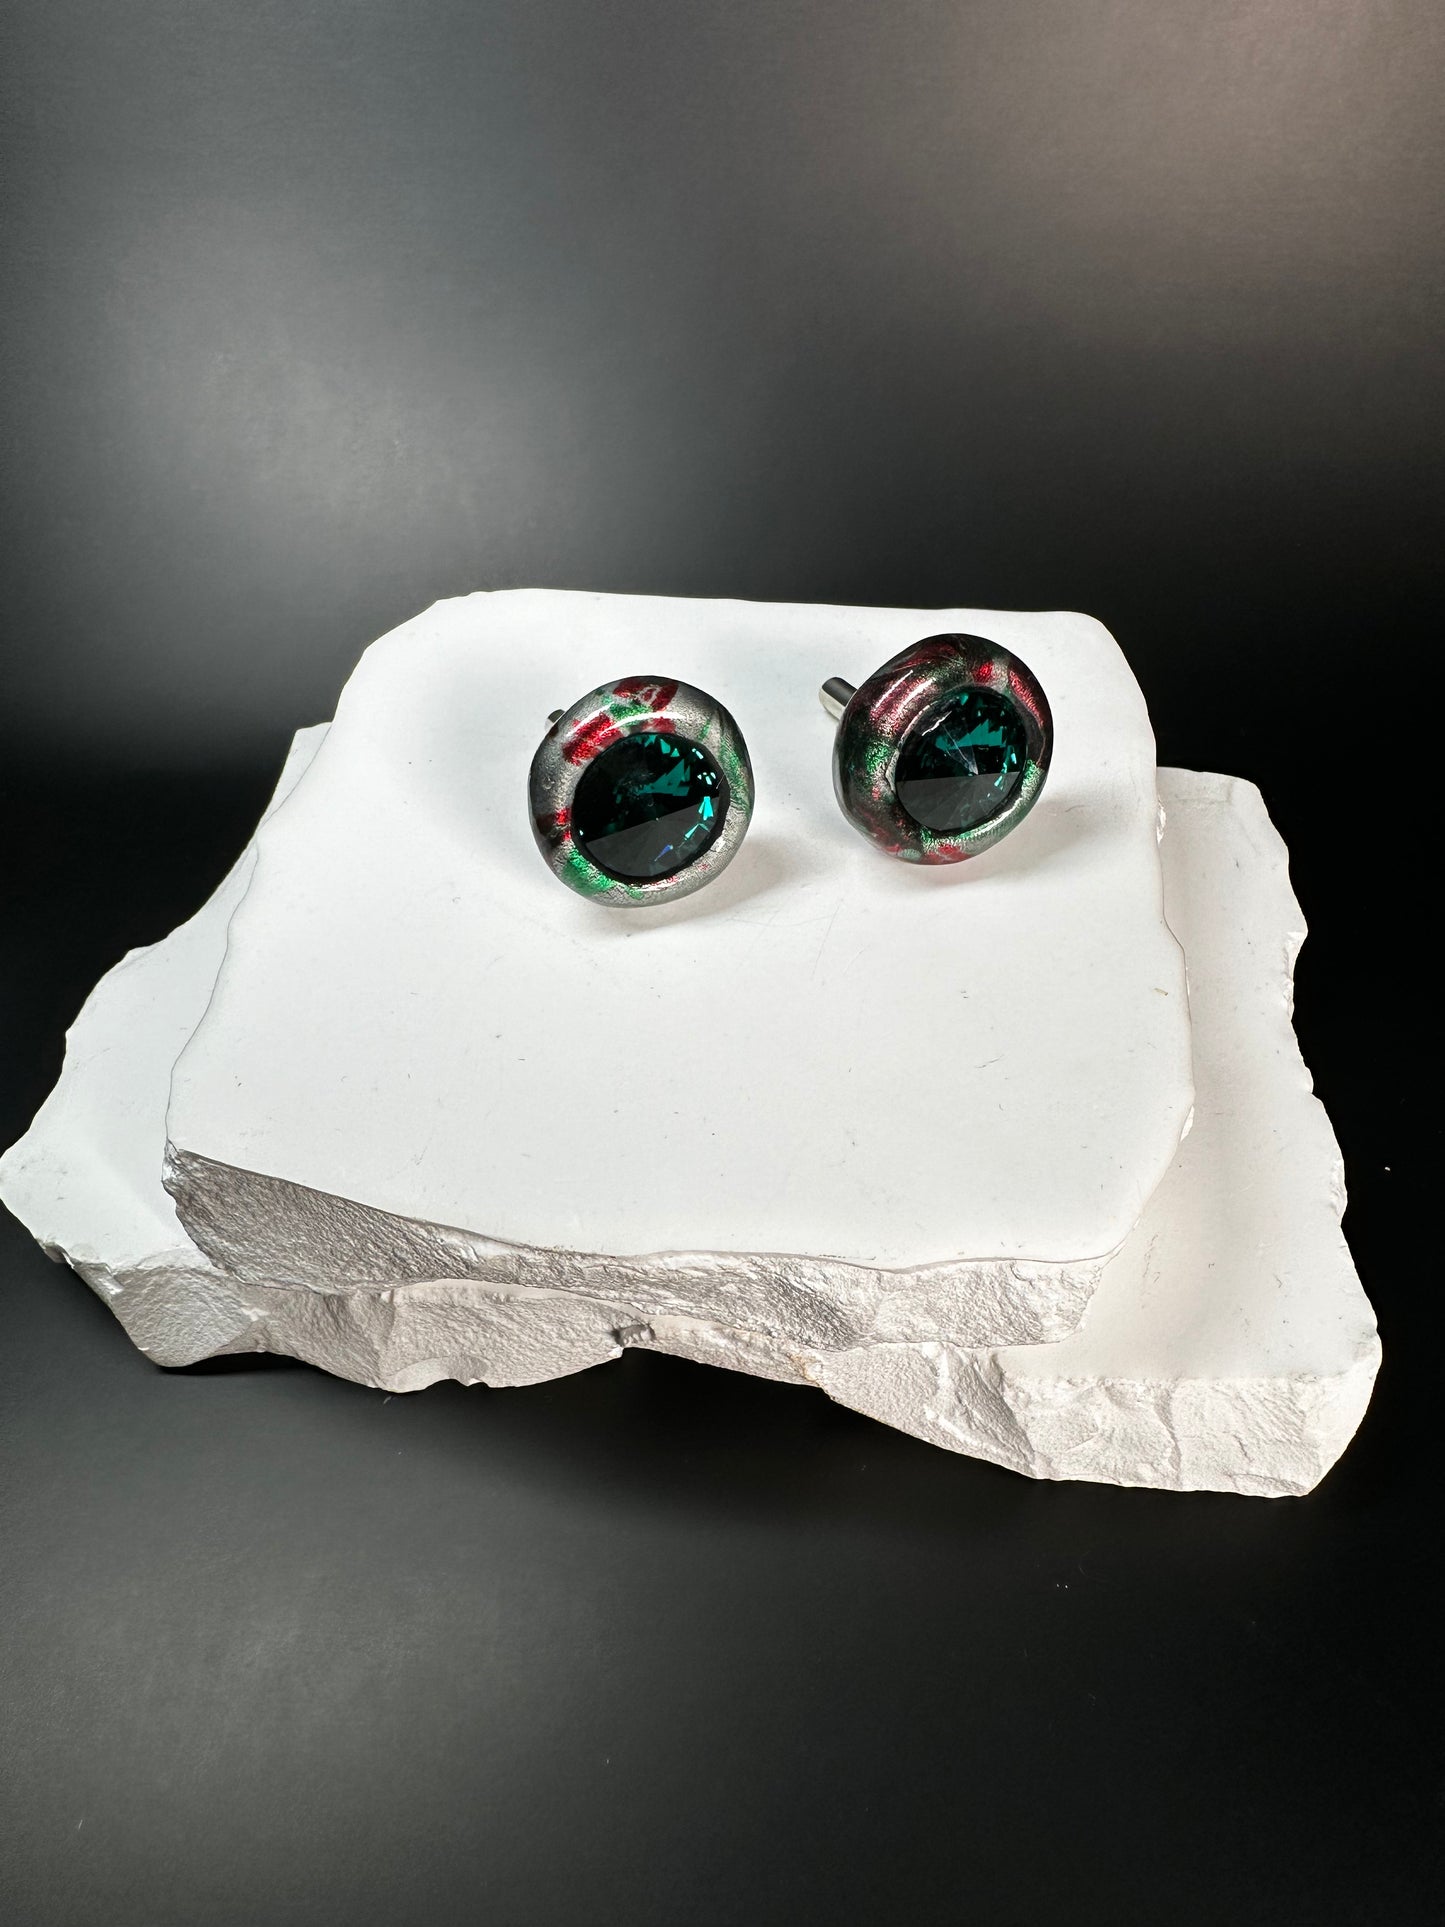 "Holiday Inspired" Cuff Links